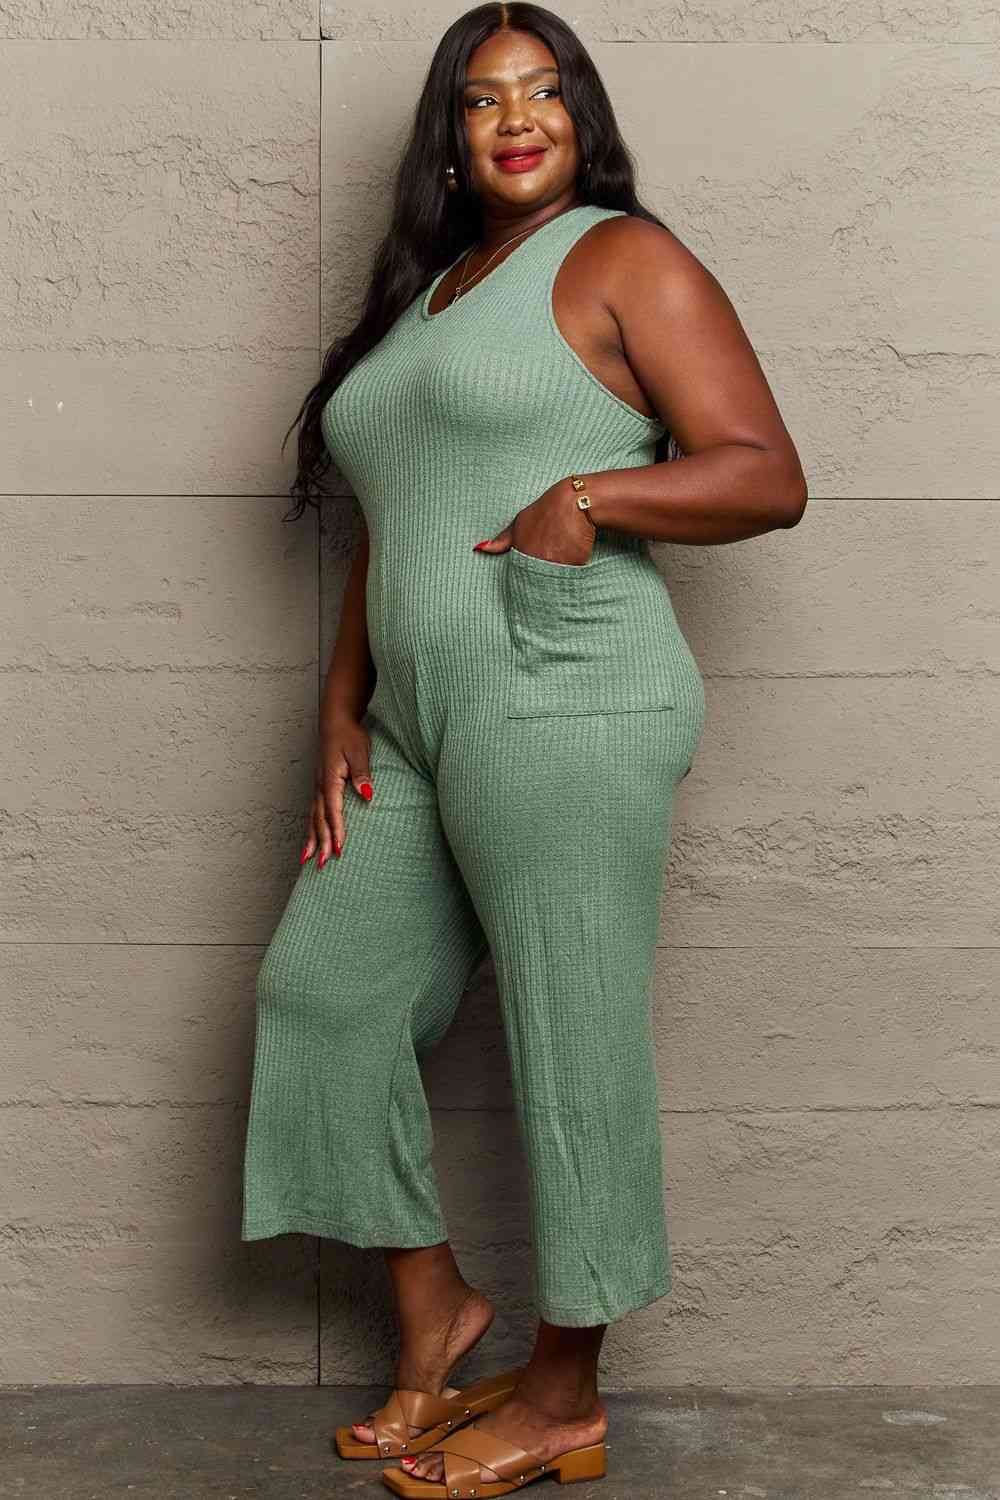 HEYSON Don't Get It Twisted Full Size Rib Knit Jumpsuit - PEONIES & LIME